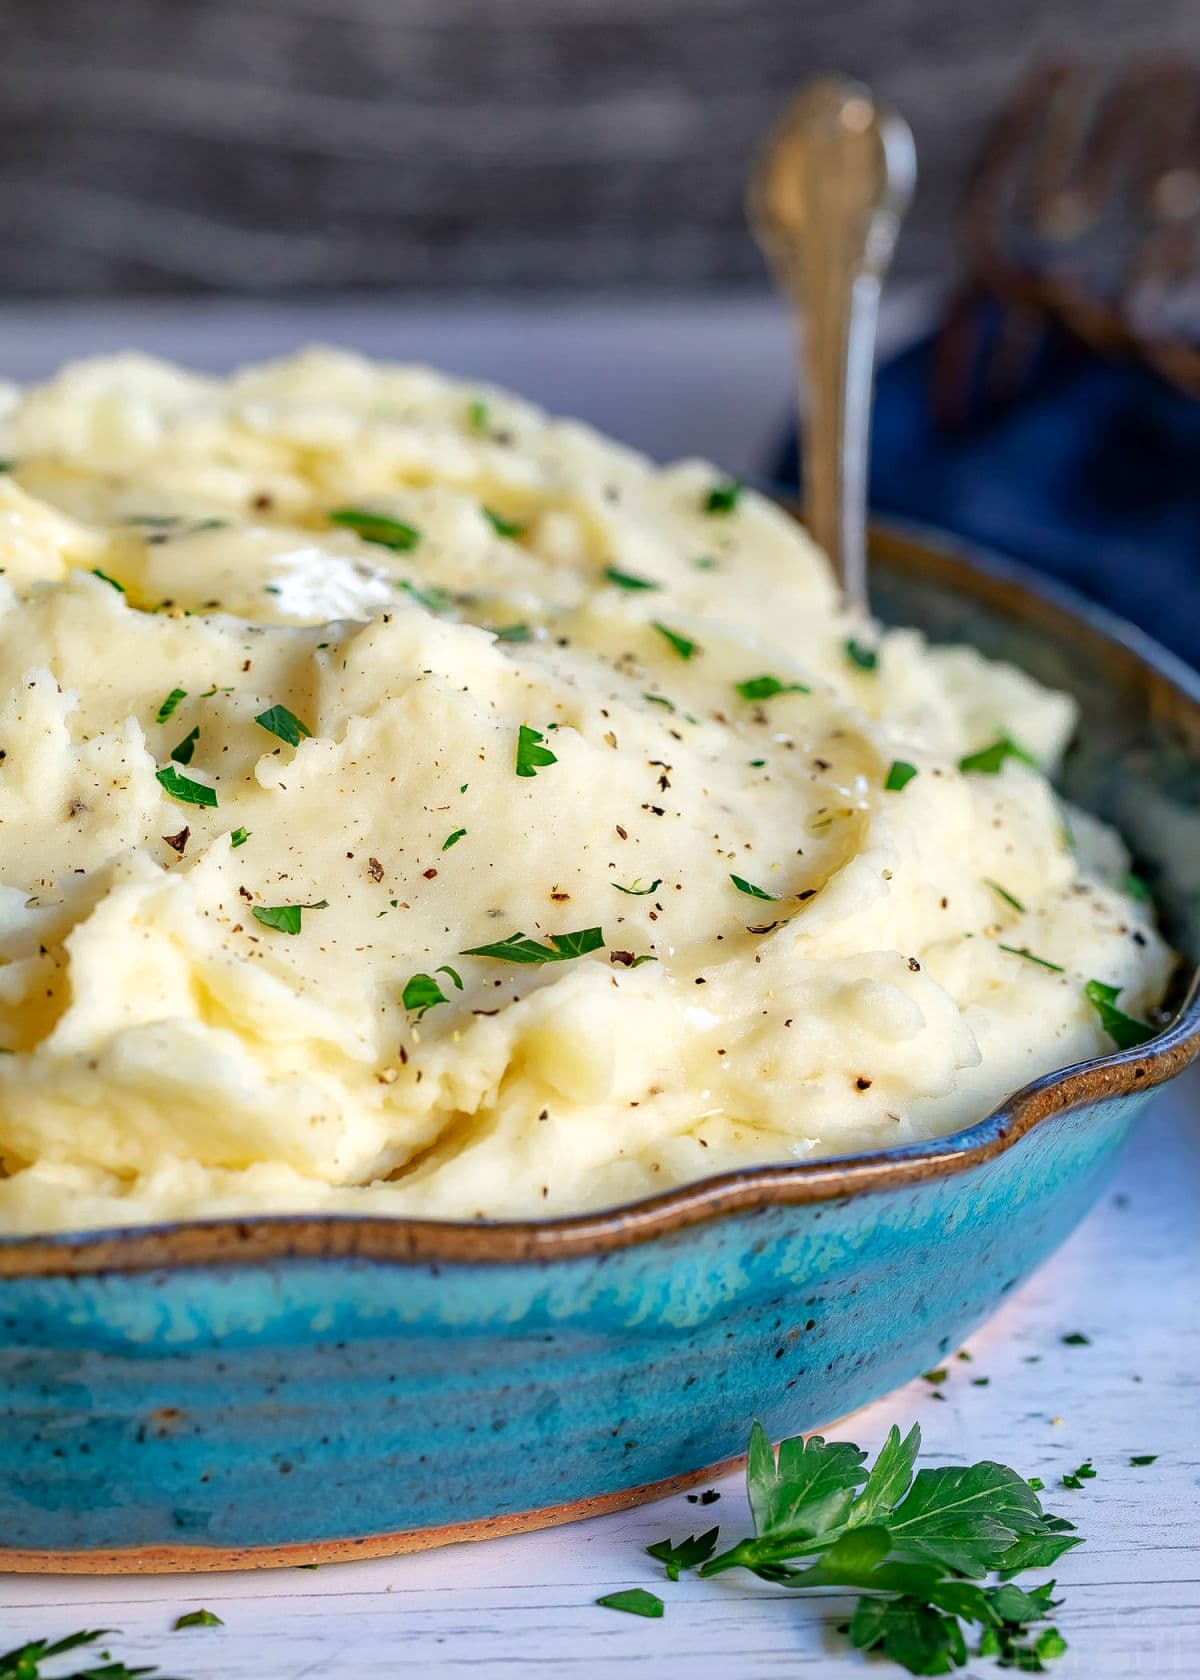 homemade mashed potatoes recipe in serving dish with spoon and chopped parsley sprinkled on top